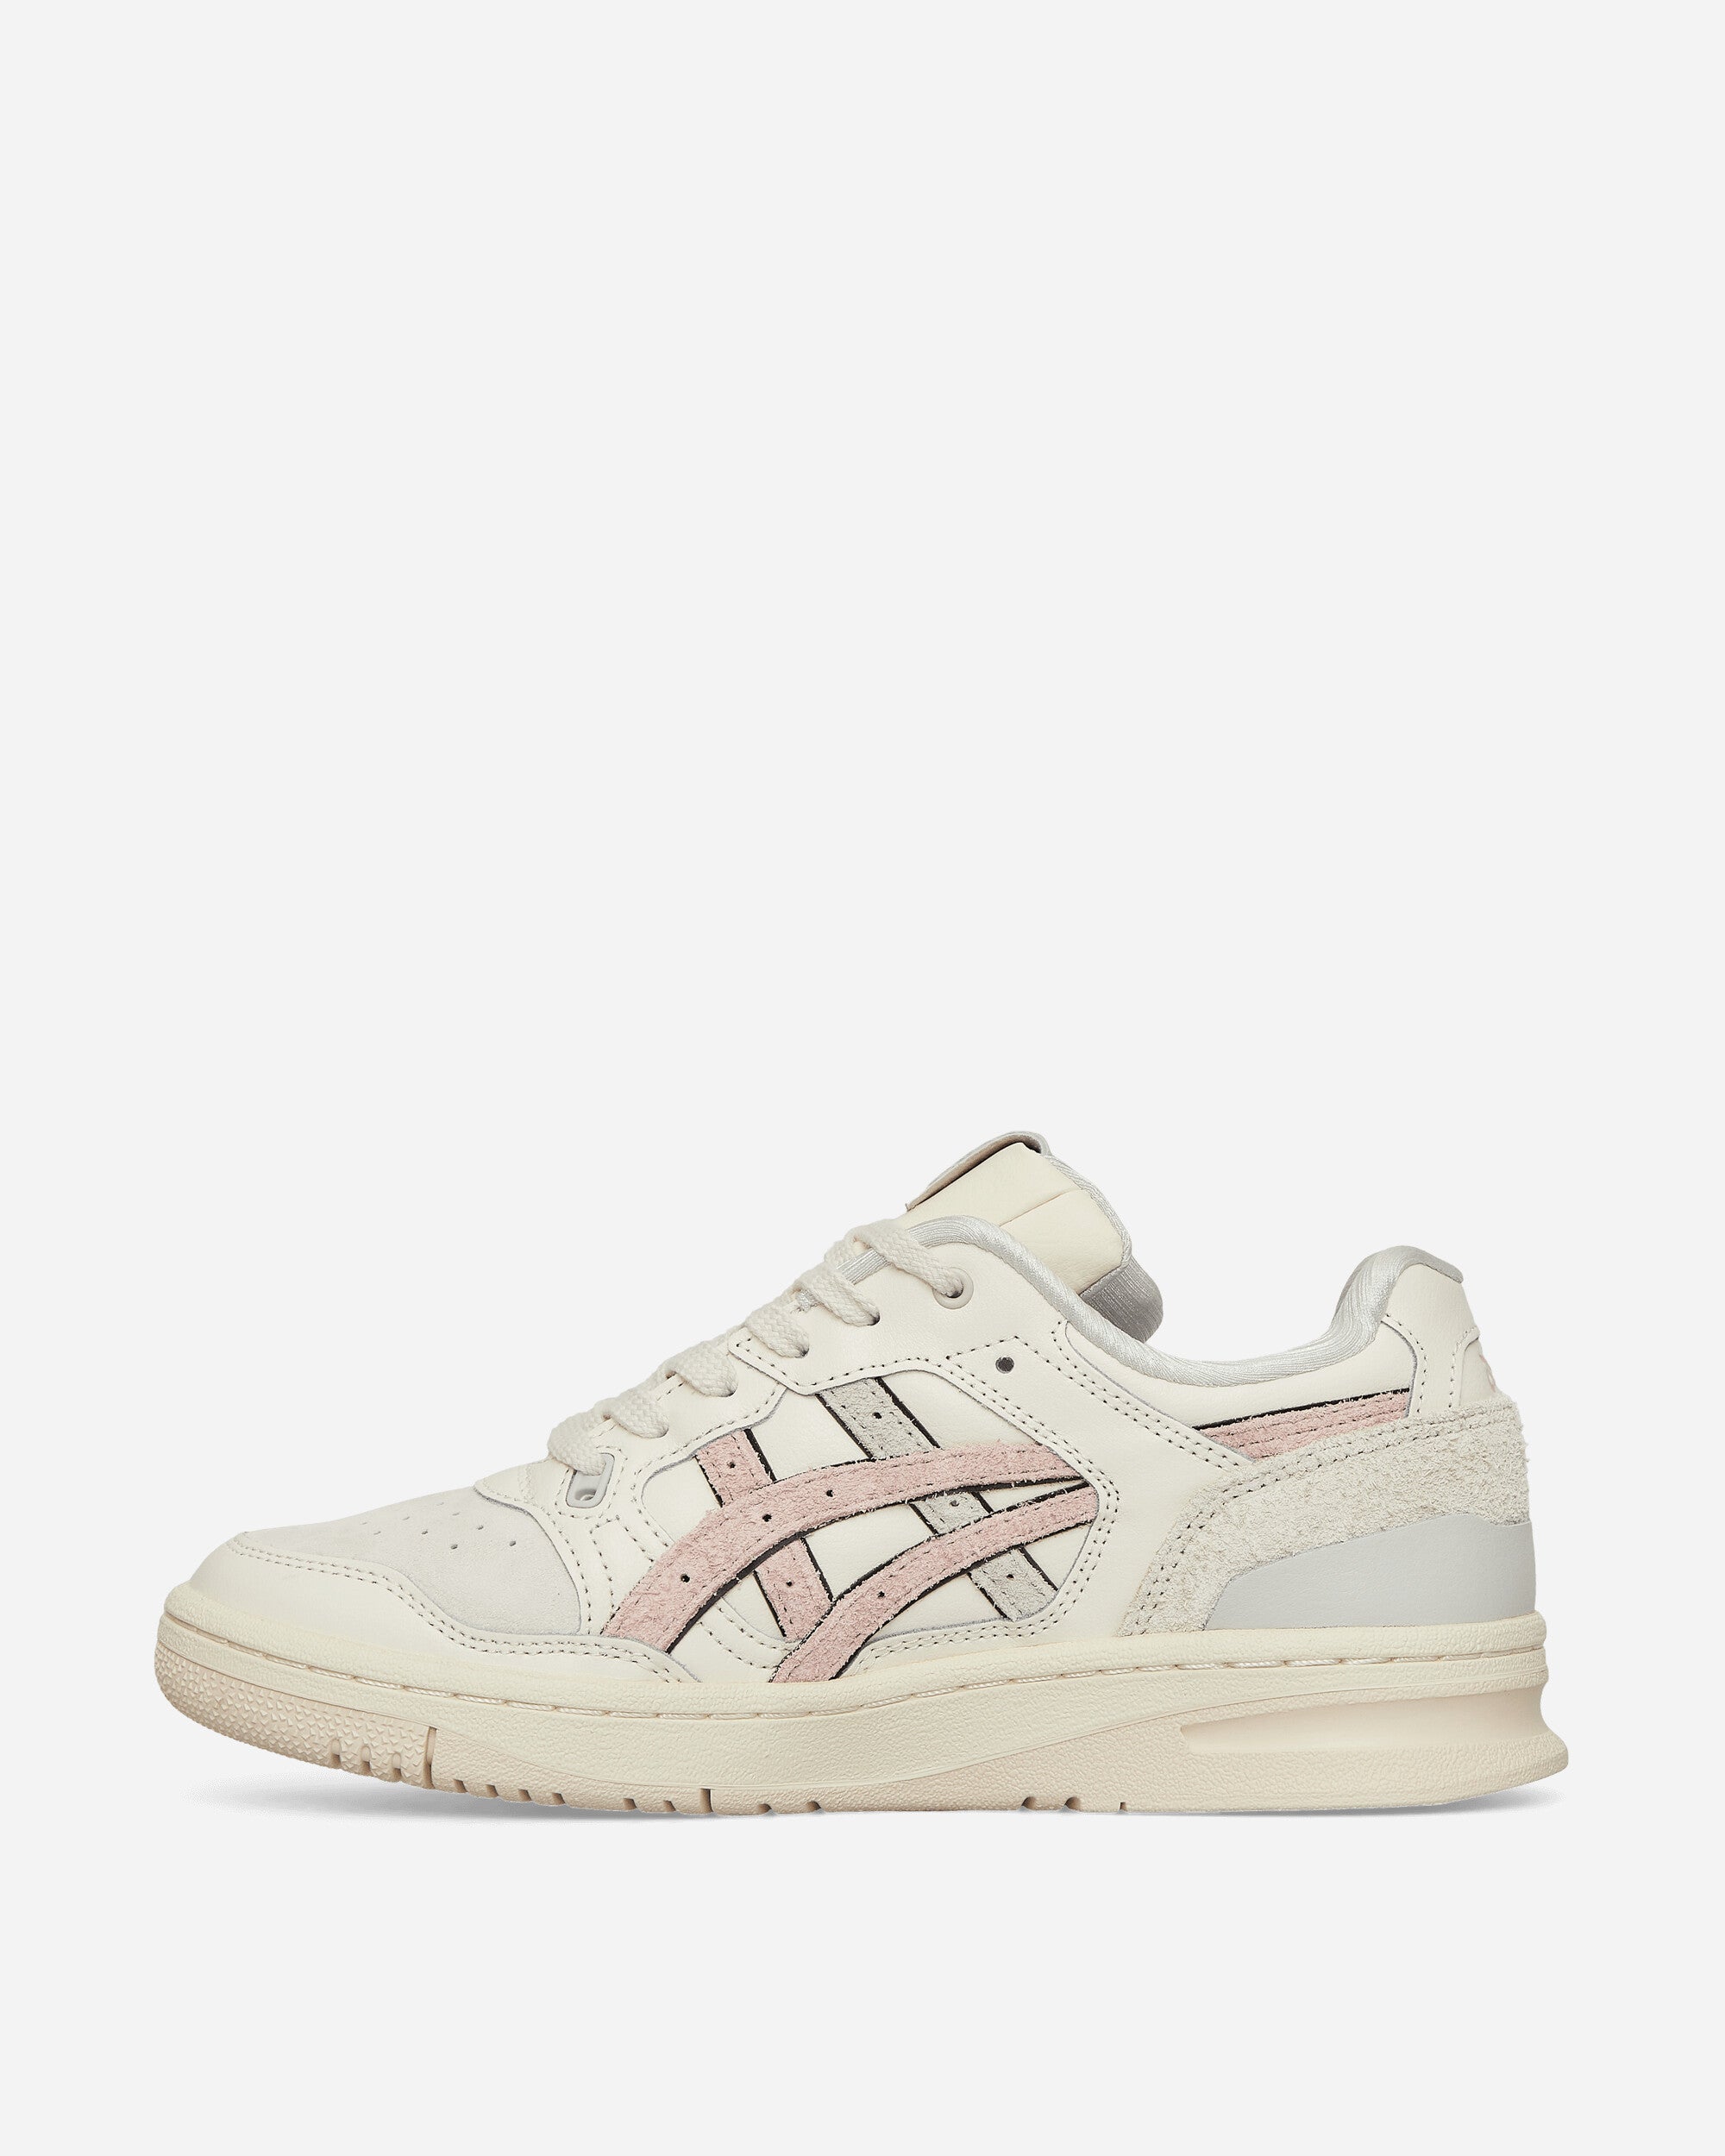 Asics EX89 Cream/Ginger Peach Sneakers Low 1203A326-100